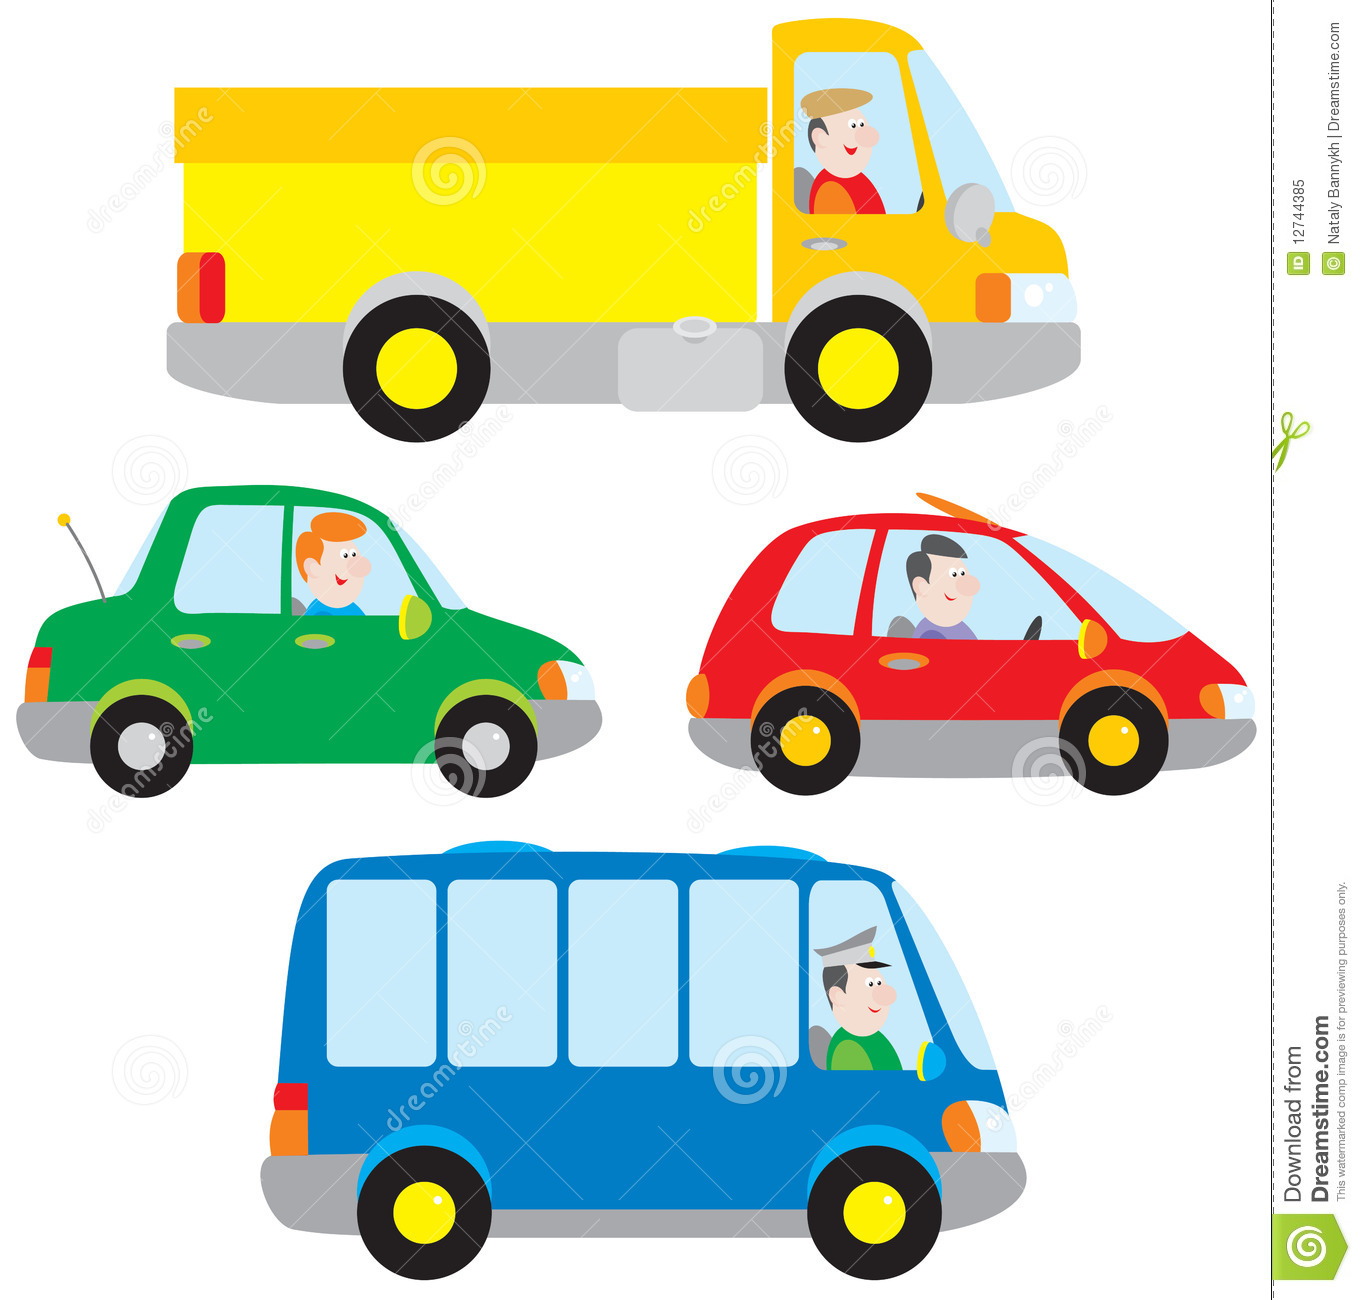 clipart cars free - photo #46